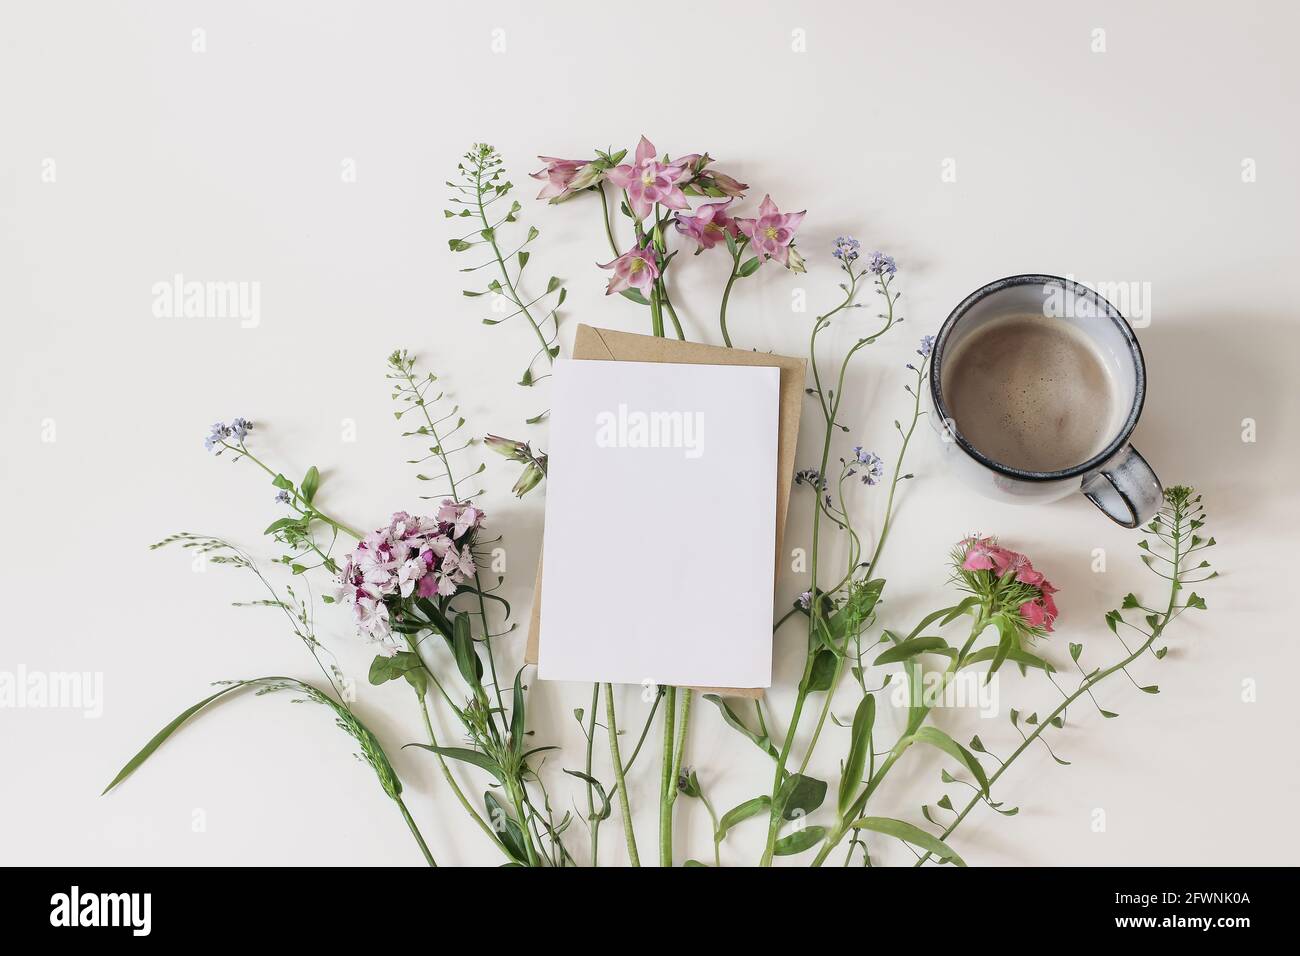 Summer greeting card, invitation mockup. Garden and wild meadow flowers. Floral banner and cup of coffee. Shepherd's purse, dianthus and aquilegia Stock Photo